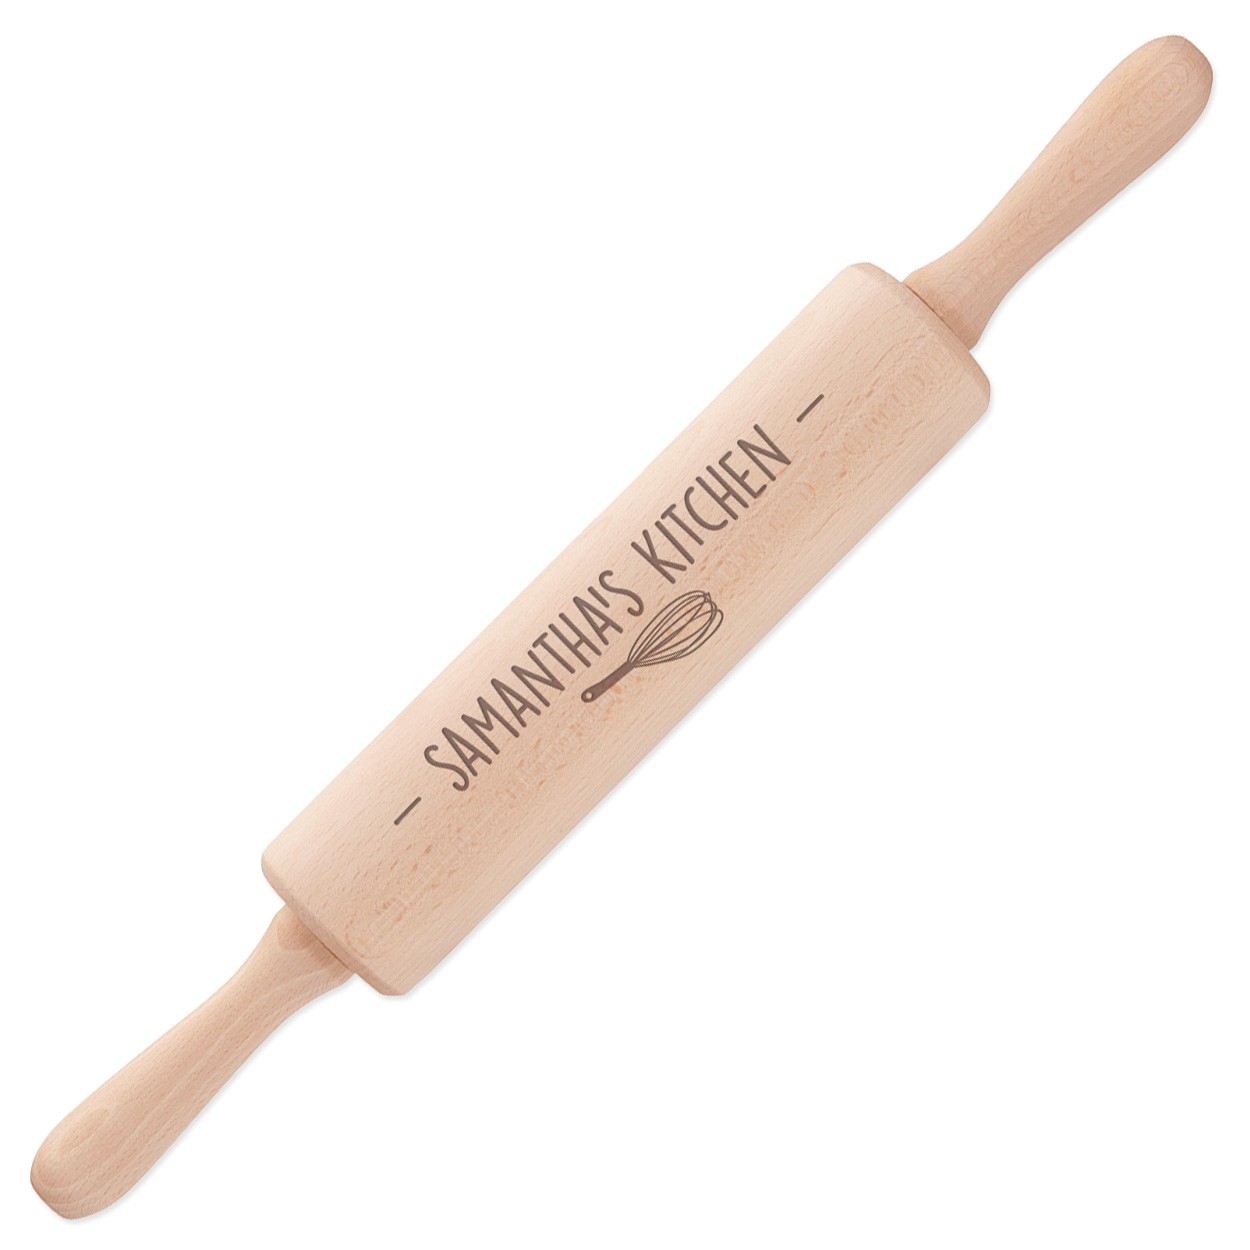 Personalised Rolling Pin Name Kitchen Whisk Revolving Wooden Any Name Custom Baking